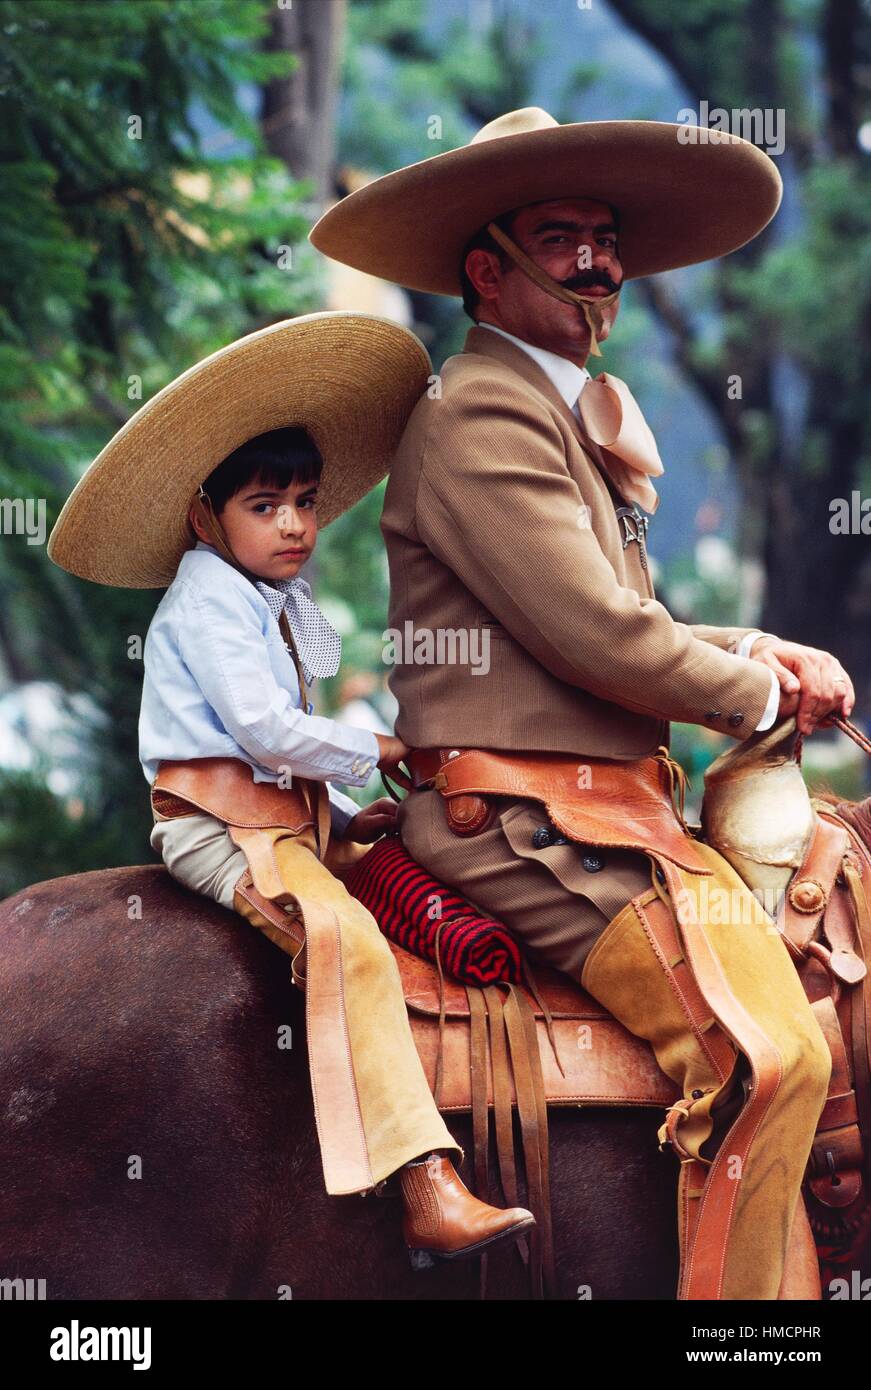 Boy and man on horseback wearing traditional clothes and wide-brimmed hats, Mexico. Stock Photo